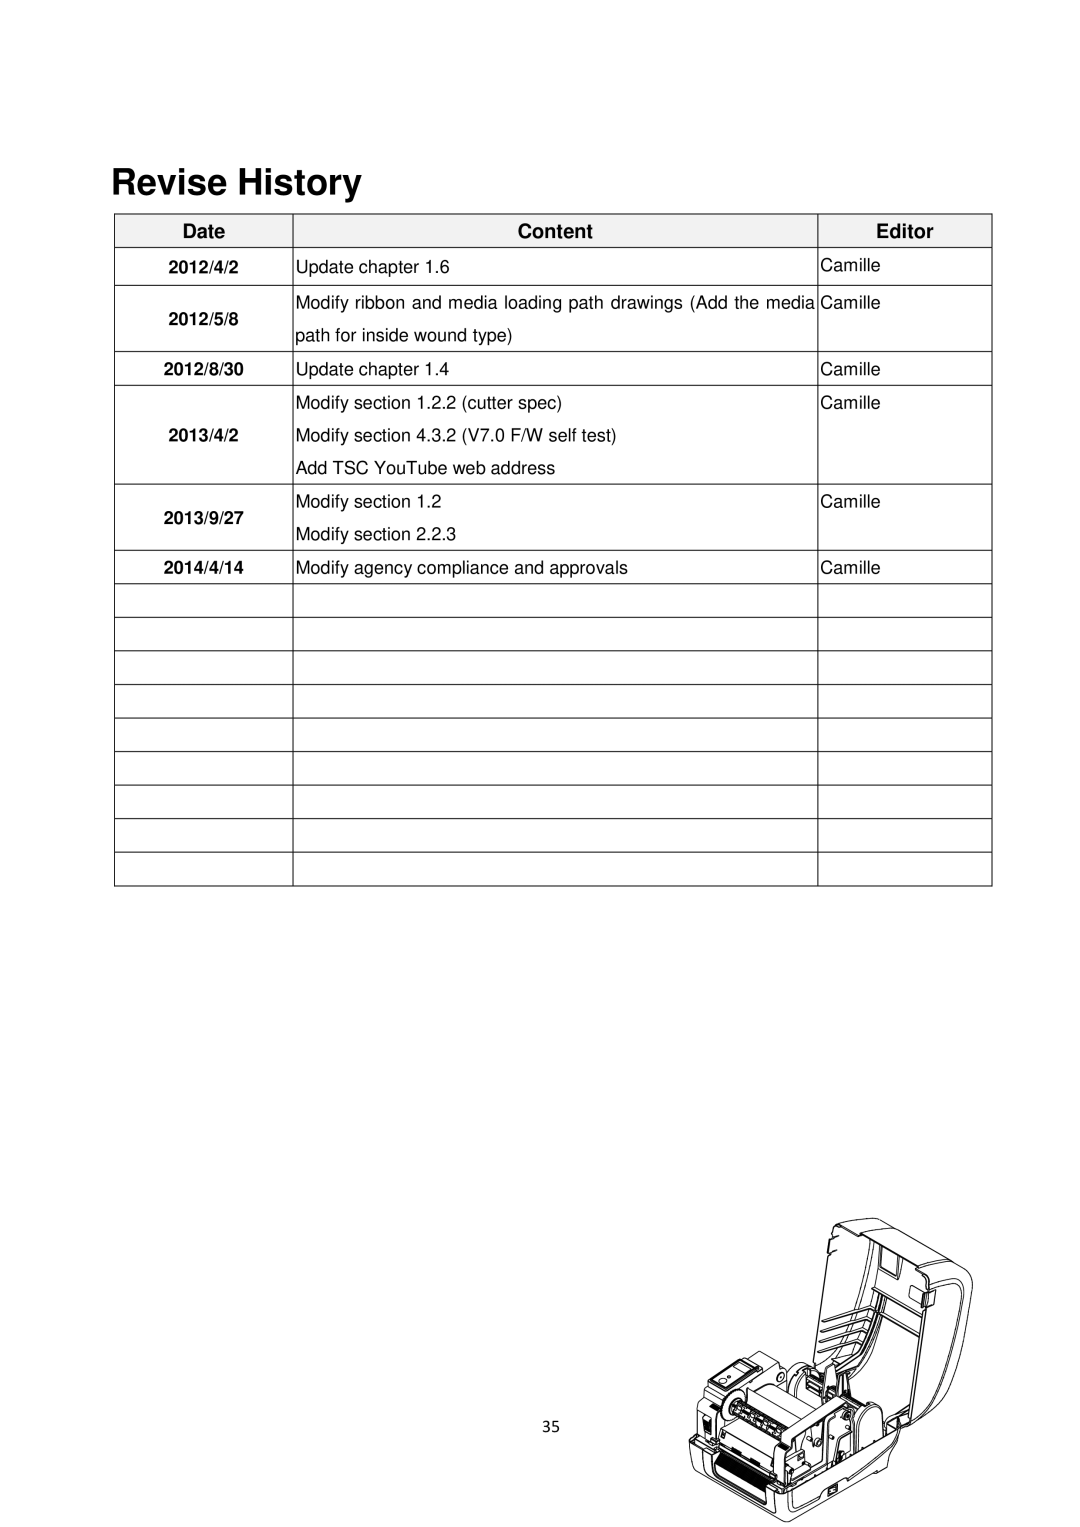 The Speaker Company ta200 manual Revise History, Date, Content, Editor, 2012/4/2, 2012/5/8, 2012/8/30, 2013/4/2, 2013/9/27 